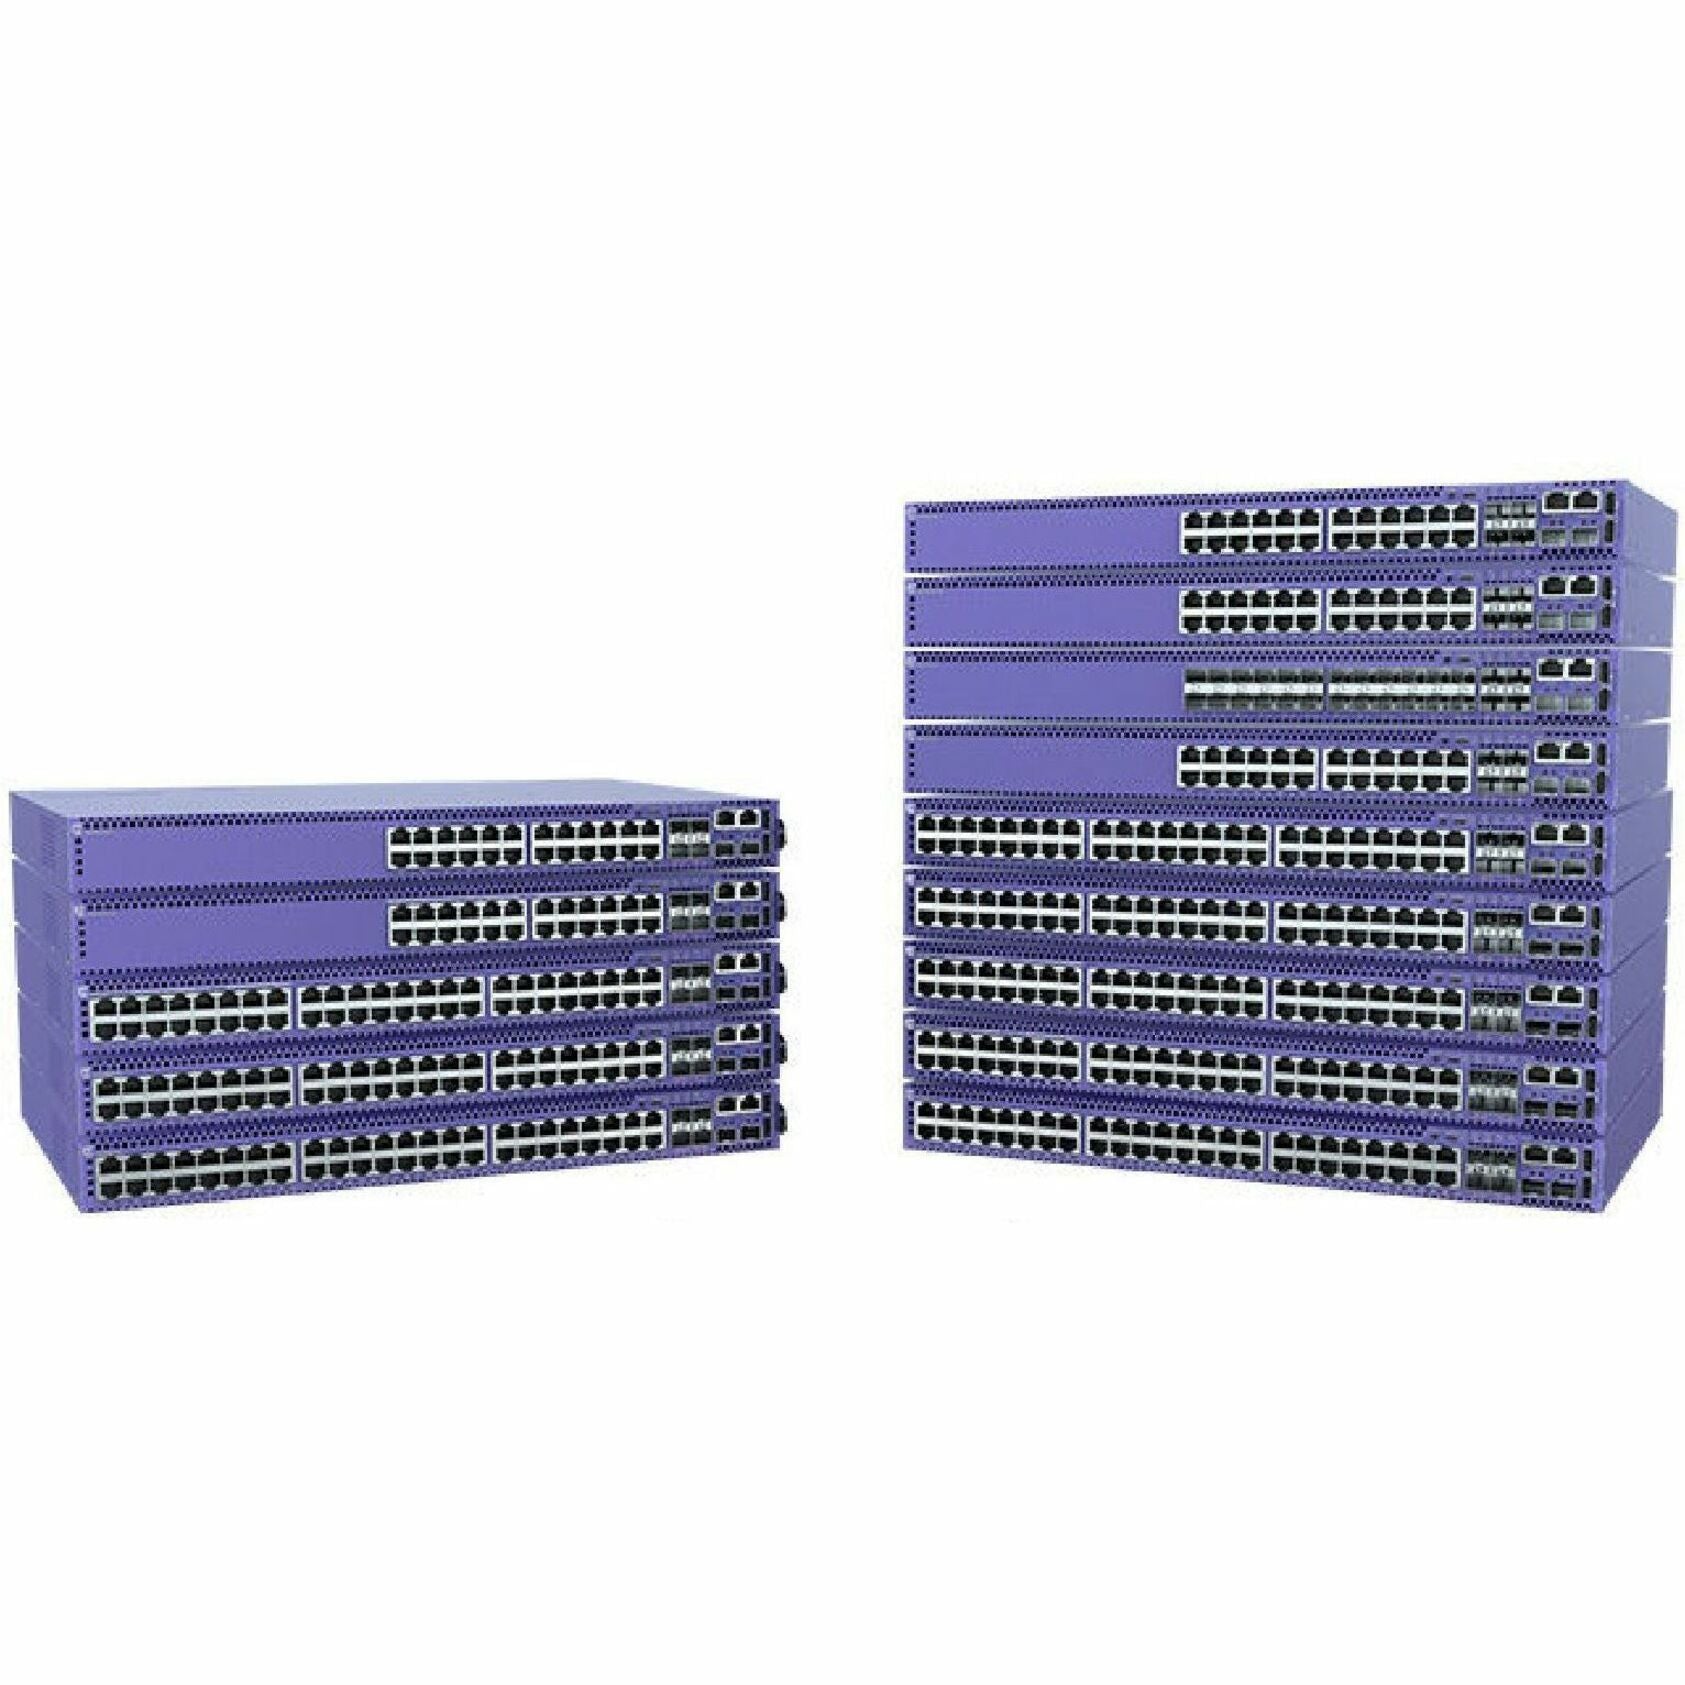 Extreme Networks 5420F-24T-4XE ExtremeSwitching 5420F Ethernet Switch, 24-Port Gigabit Ethernet Network, 4 x 10 Gigabit Ethernet Expansion Slot, Stackable